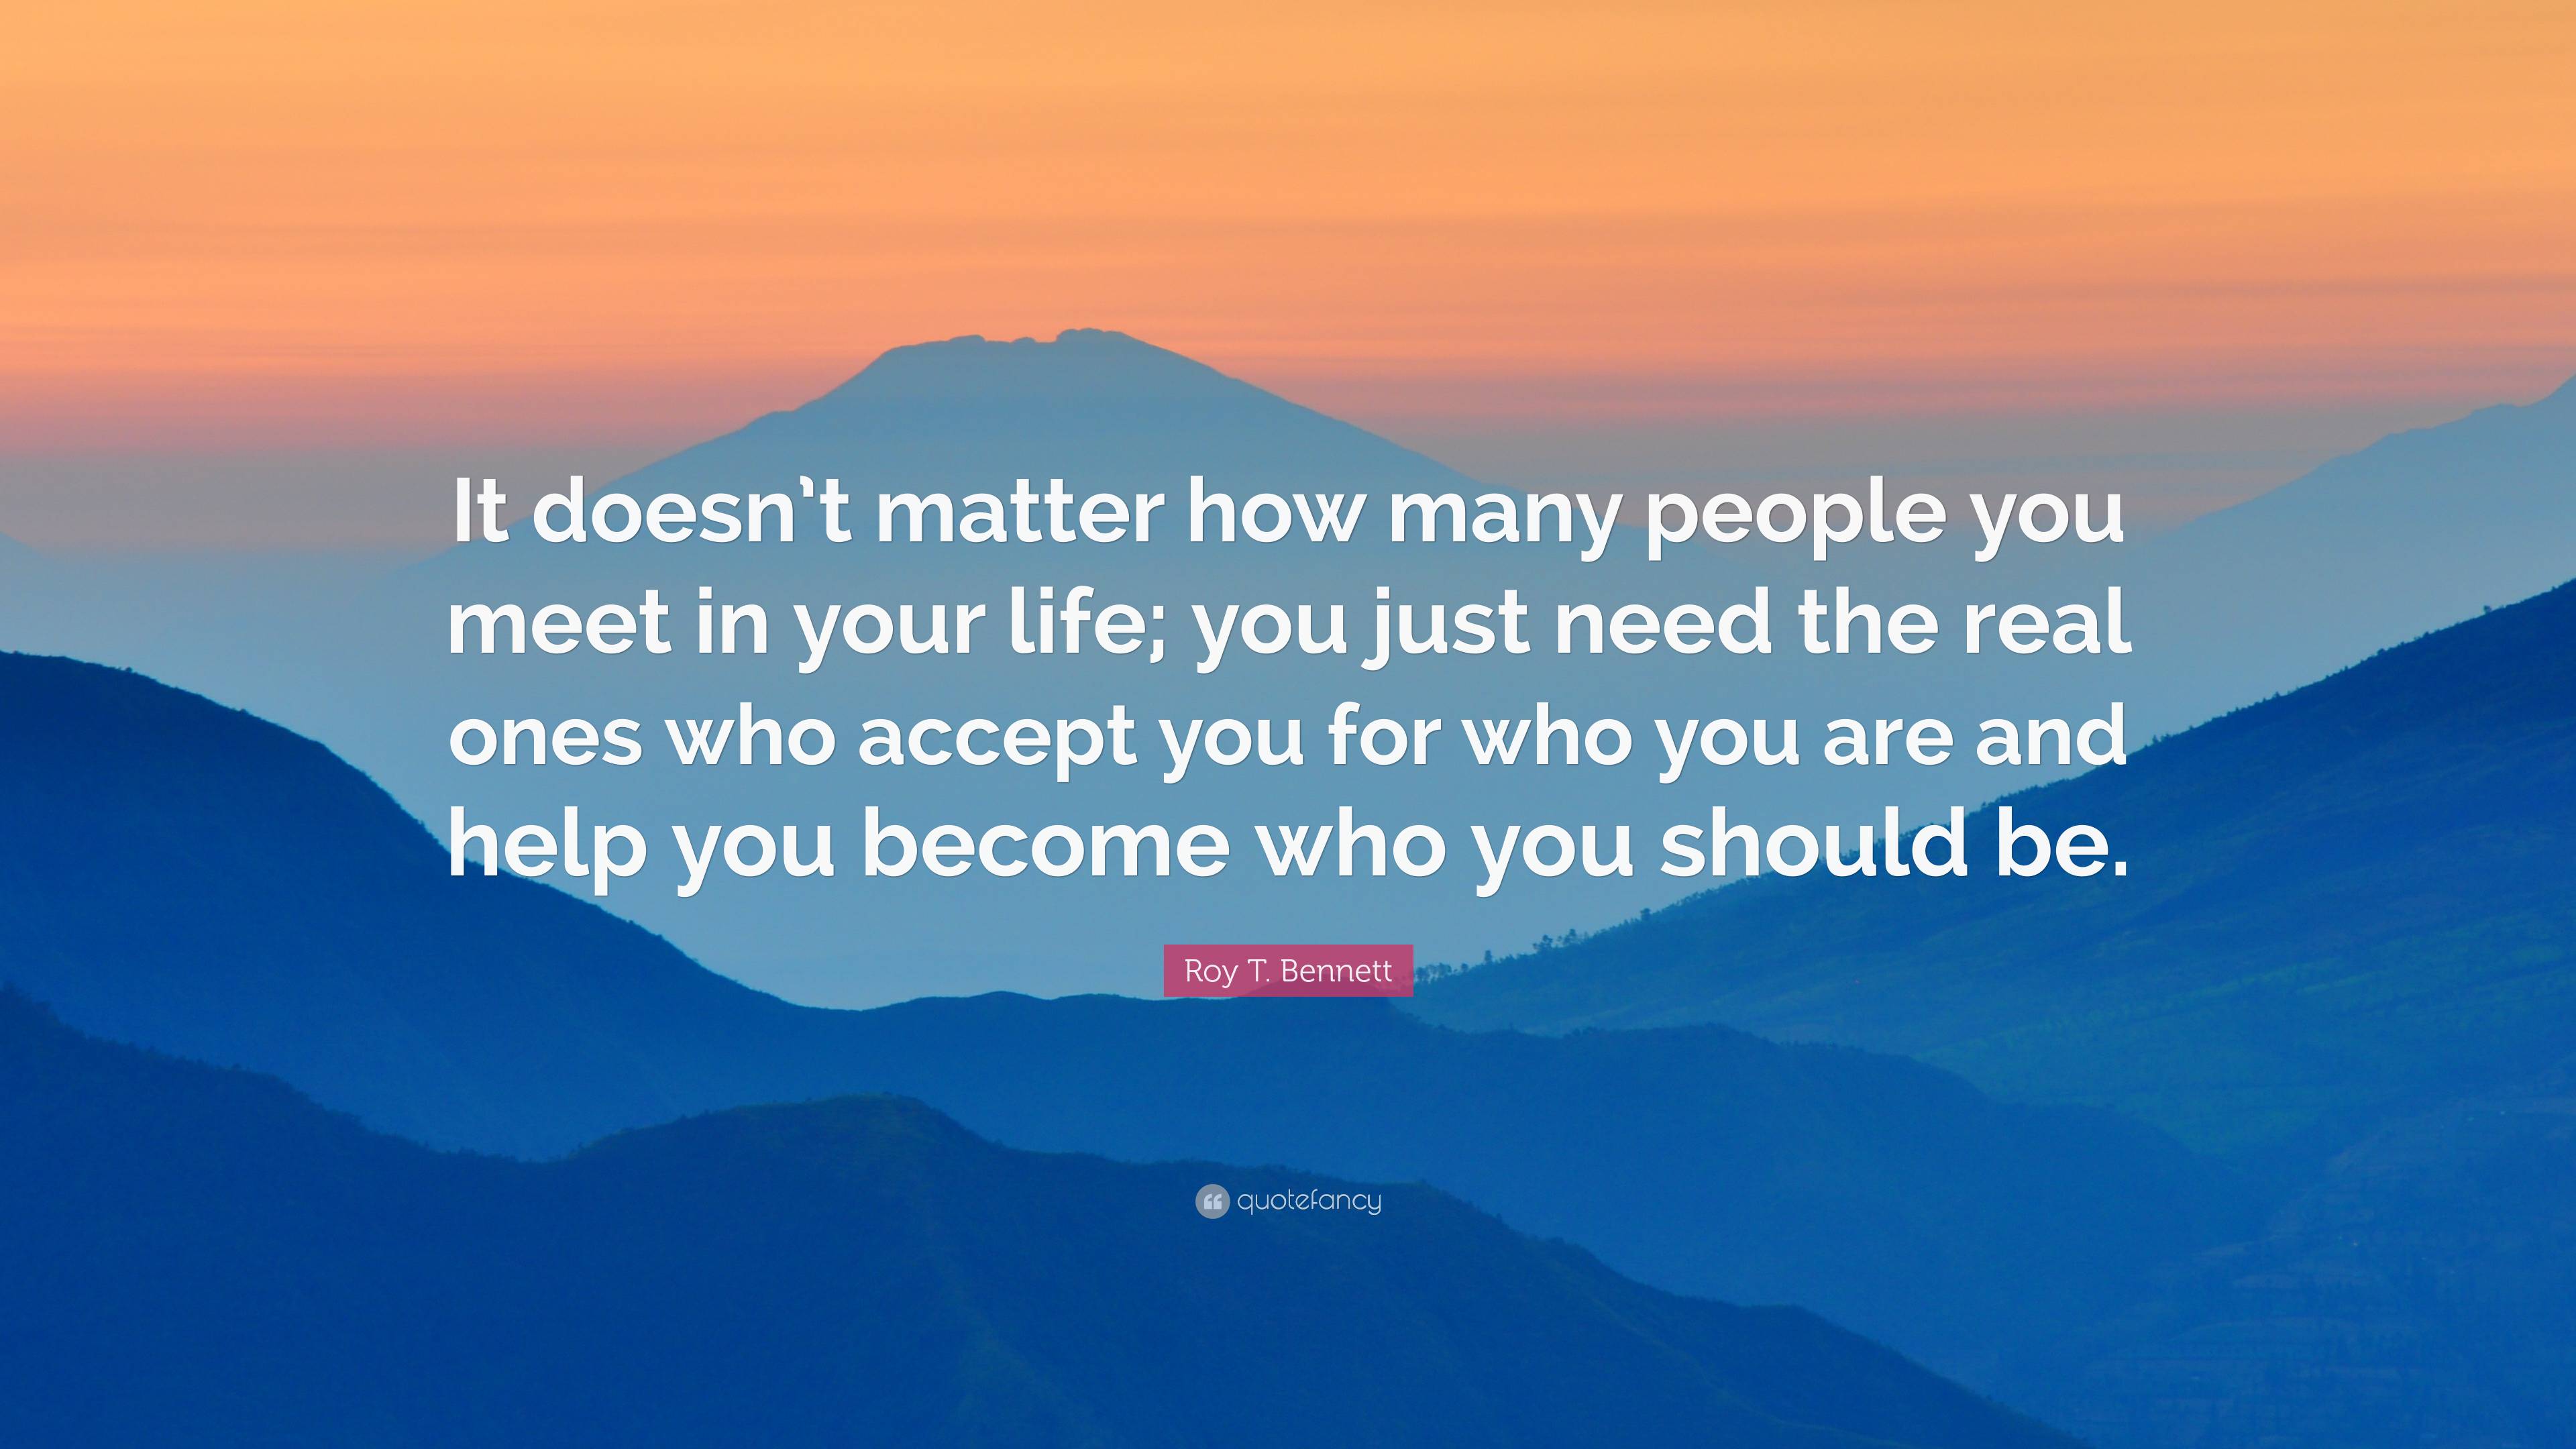 Roy T. Bennett Quote: “It doesn’t matter how many people you meet in ...